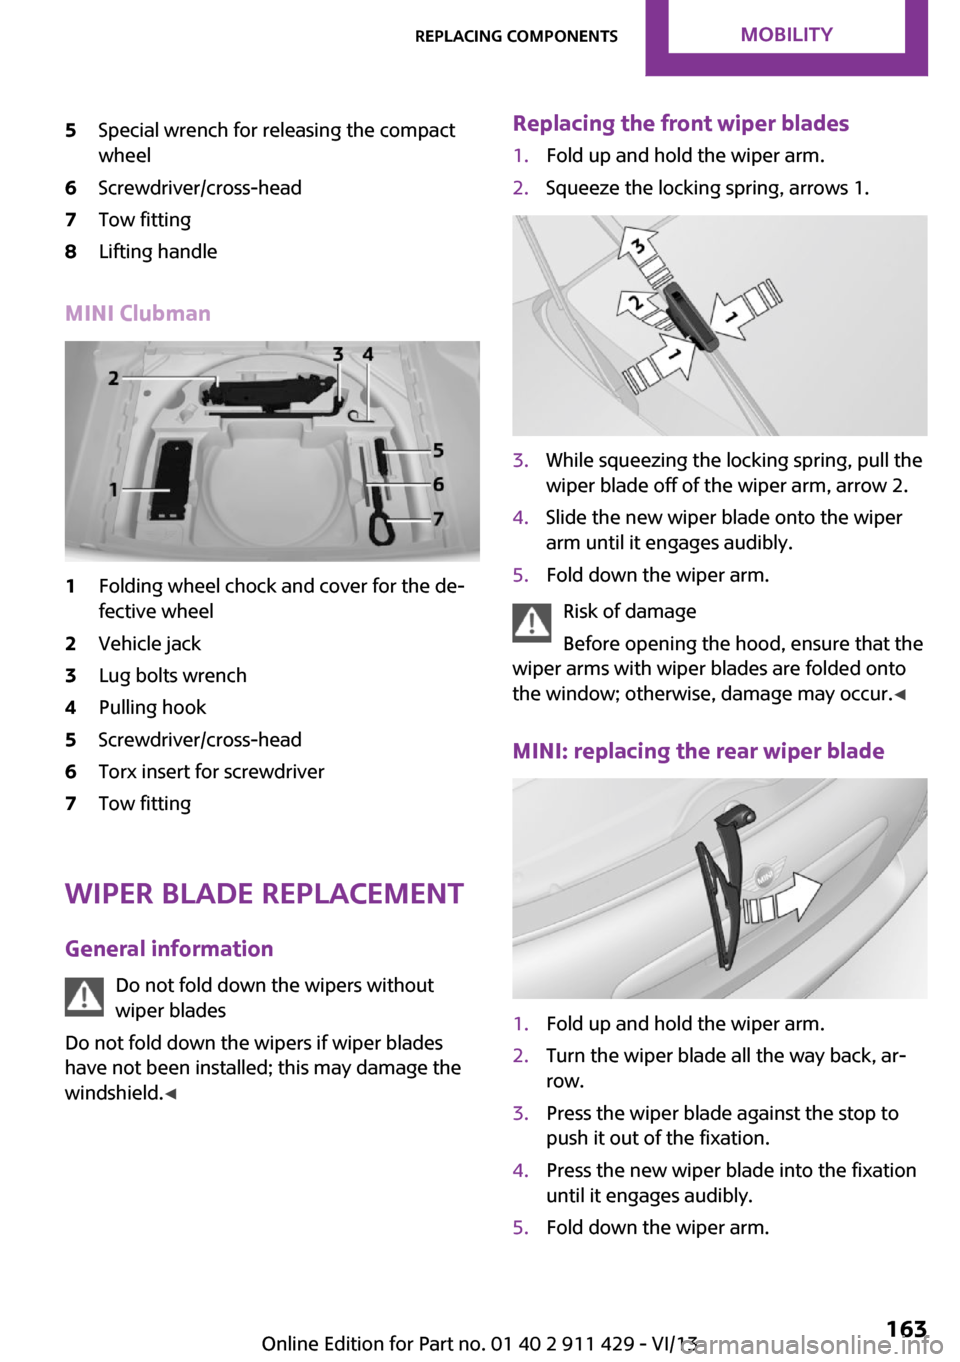 MINI Clubman 2014  Owners Manual 5Special wrench for releasing the compact
wheel6Screwdriver/cross-head7Tow fitting8Lifting handle
MINI Clubman
1Folding wheel chock and cover for the de‐
fective wheel2Vehicle jack3Lug bolts wrench4